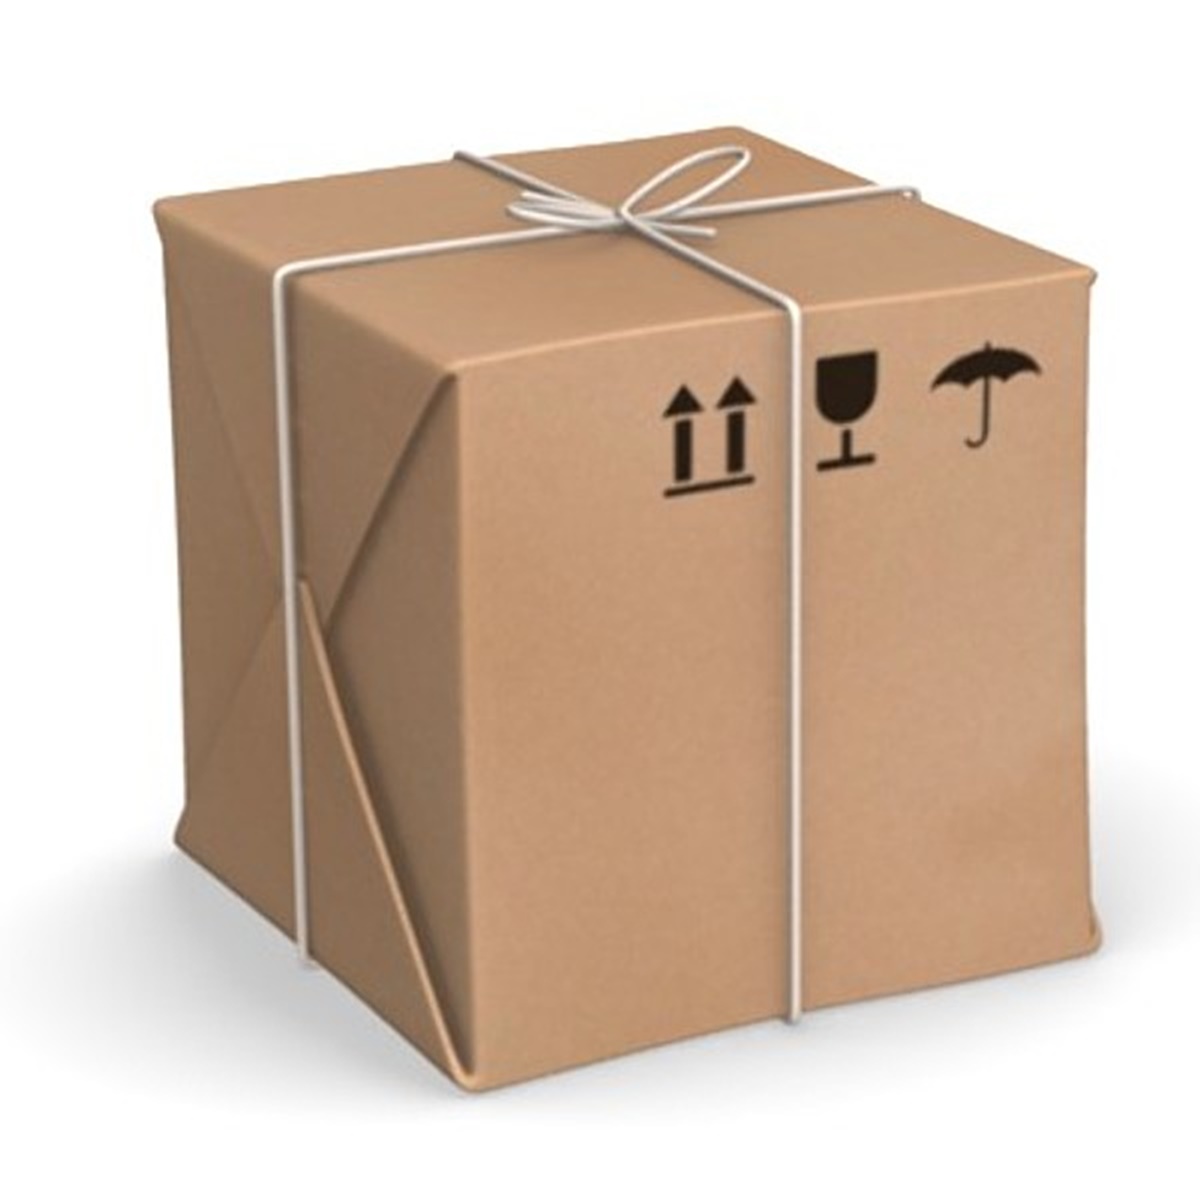 What Is The Cheapest Way To Ship Large Packages